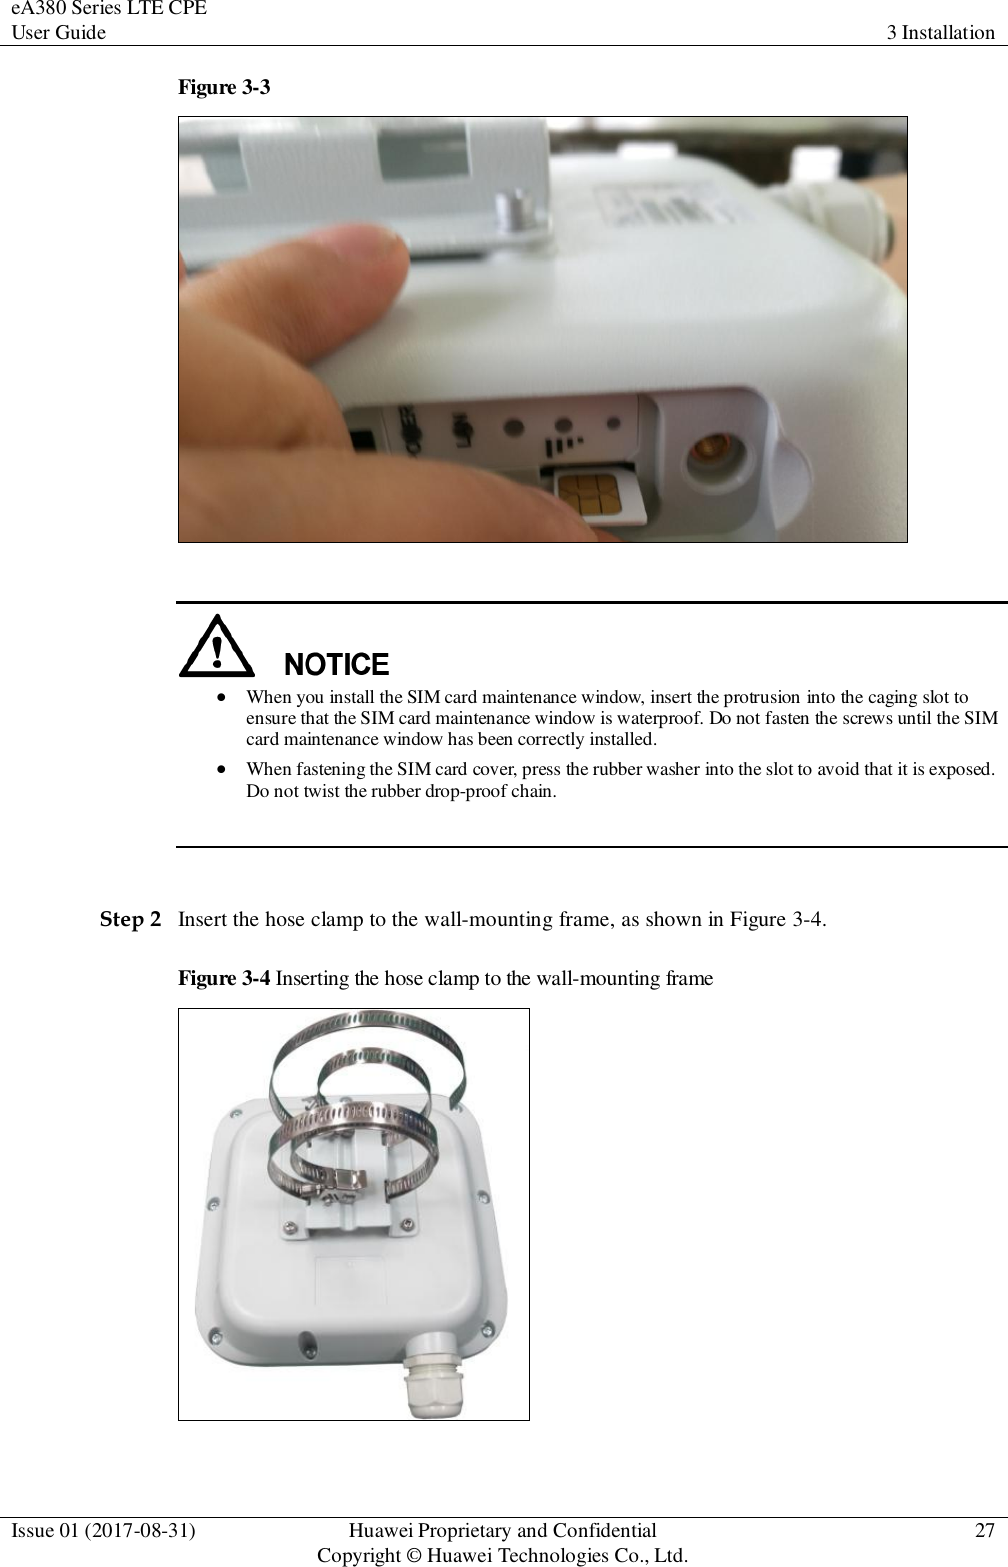 eA380 Series LTE CPE User Guide 3 Installation  Issue 01 (2017-08-31) Huawei Proprietary and Confidential                                     Copyright © Huawei Technologies Co., Ltd. 27  Figure 3-3      When you install the SIM card maintenance window, insert the protrusion into the caging slot to ensure that the SIM card maintenance window is waterproof. Do not fasten the screws until the SIM card maintenance window has been correctly installed.    When fastening the SIM card cover, press the rubber washer into the slot to avoid that it is exposed. Do not twist the rubber drop-proof chain.   Step 2 Insert the hose clamp to the wall-mounting frame, as shown in Figure 3-4. Figure 3-4 Inserting the hose clamp to the wall-mounting frame   